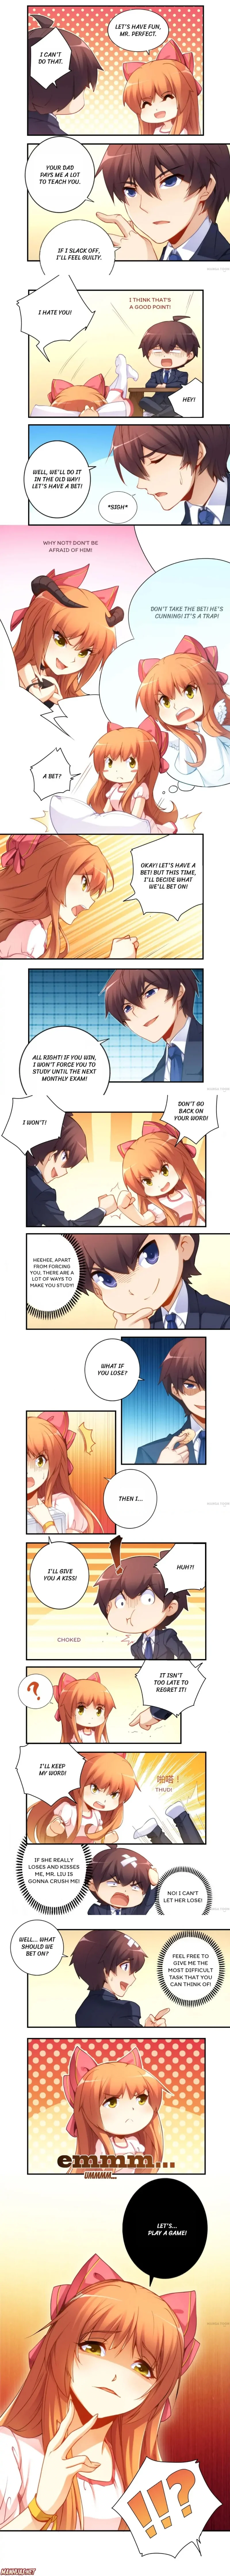 The Perfect Guy - Page 2